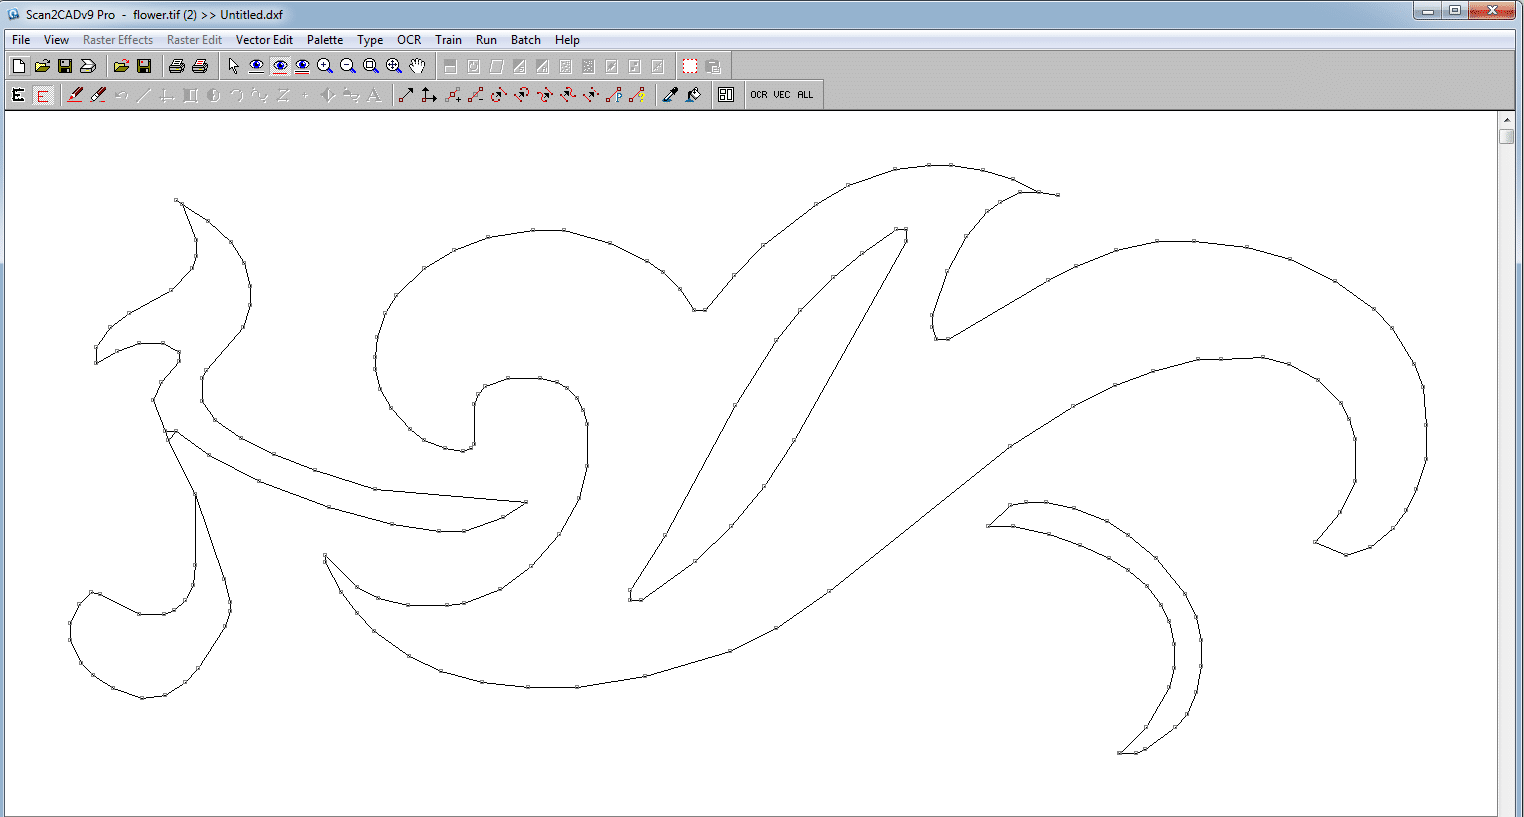 A vector image formed of lines